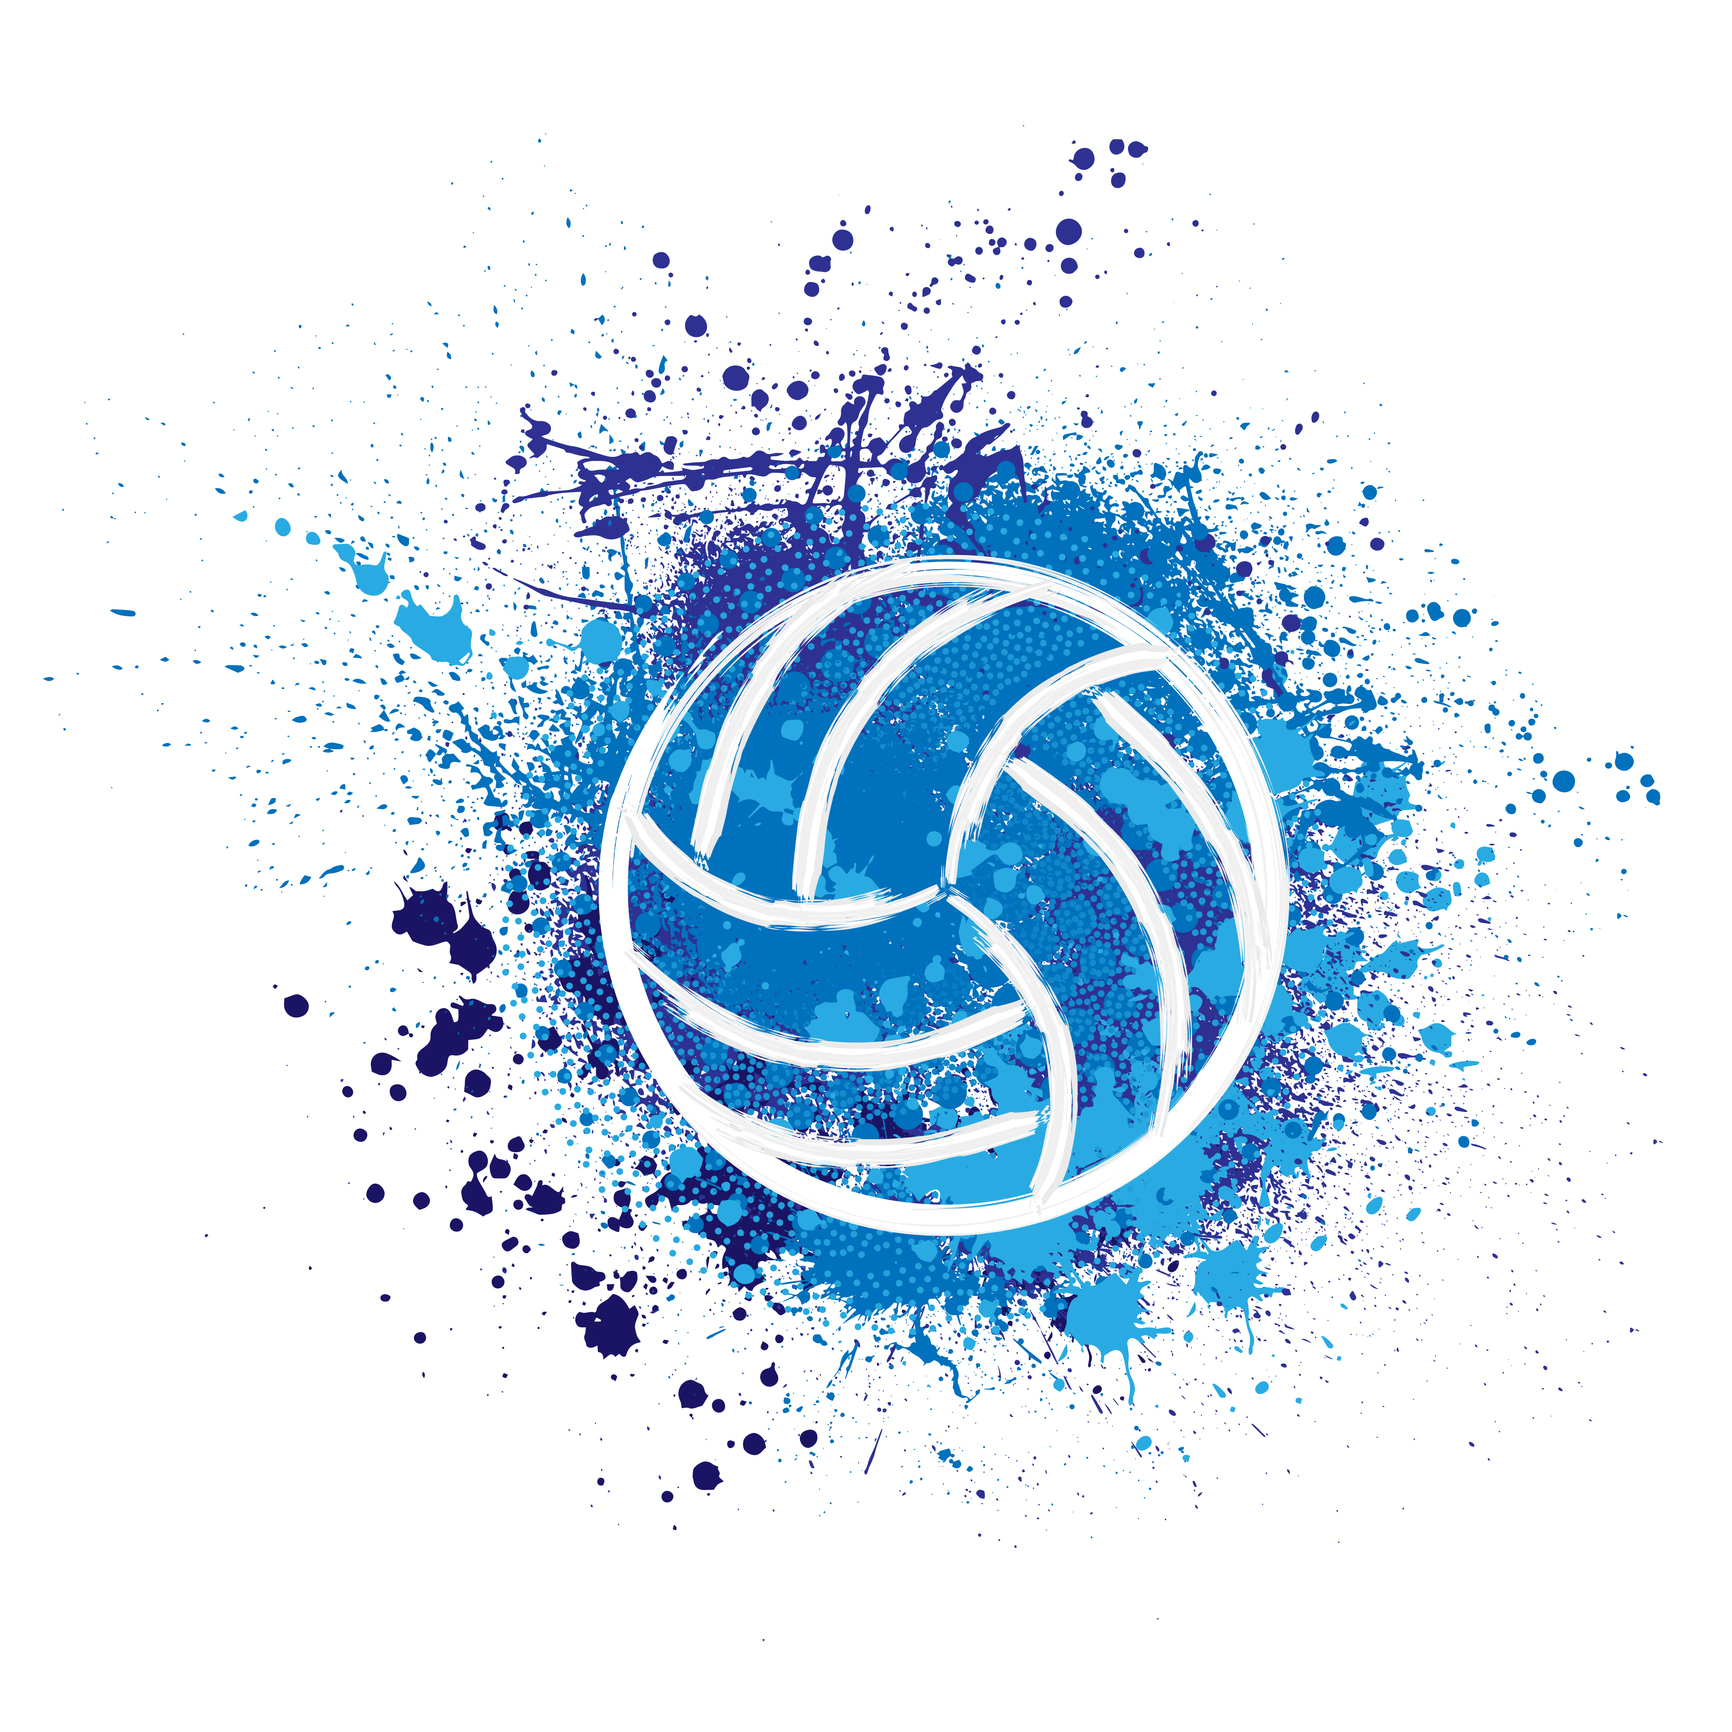 Volleyball grunge background - Health Unlimited - Health Unlimited